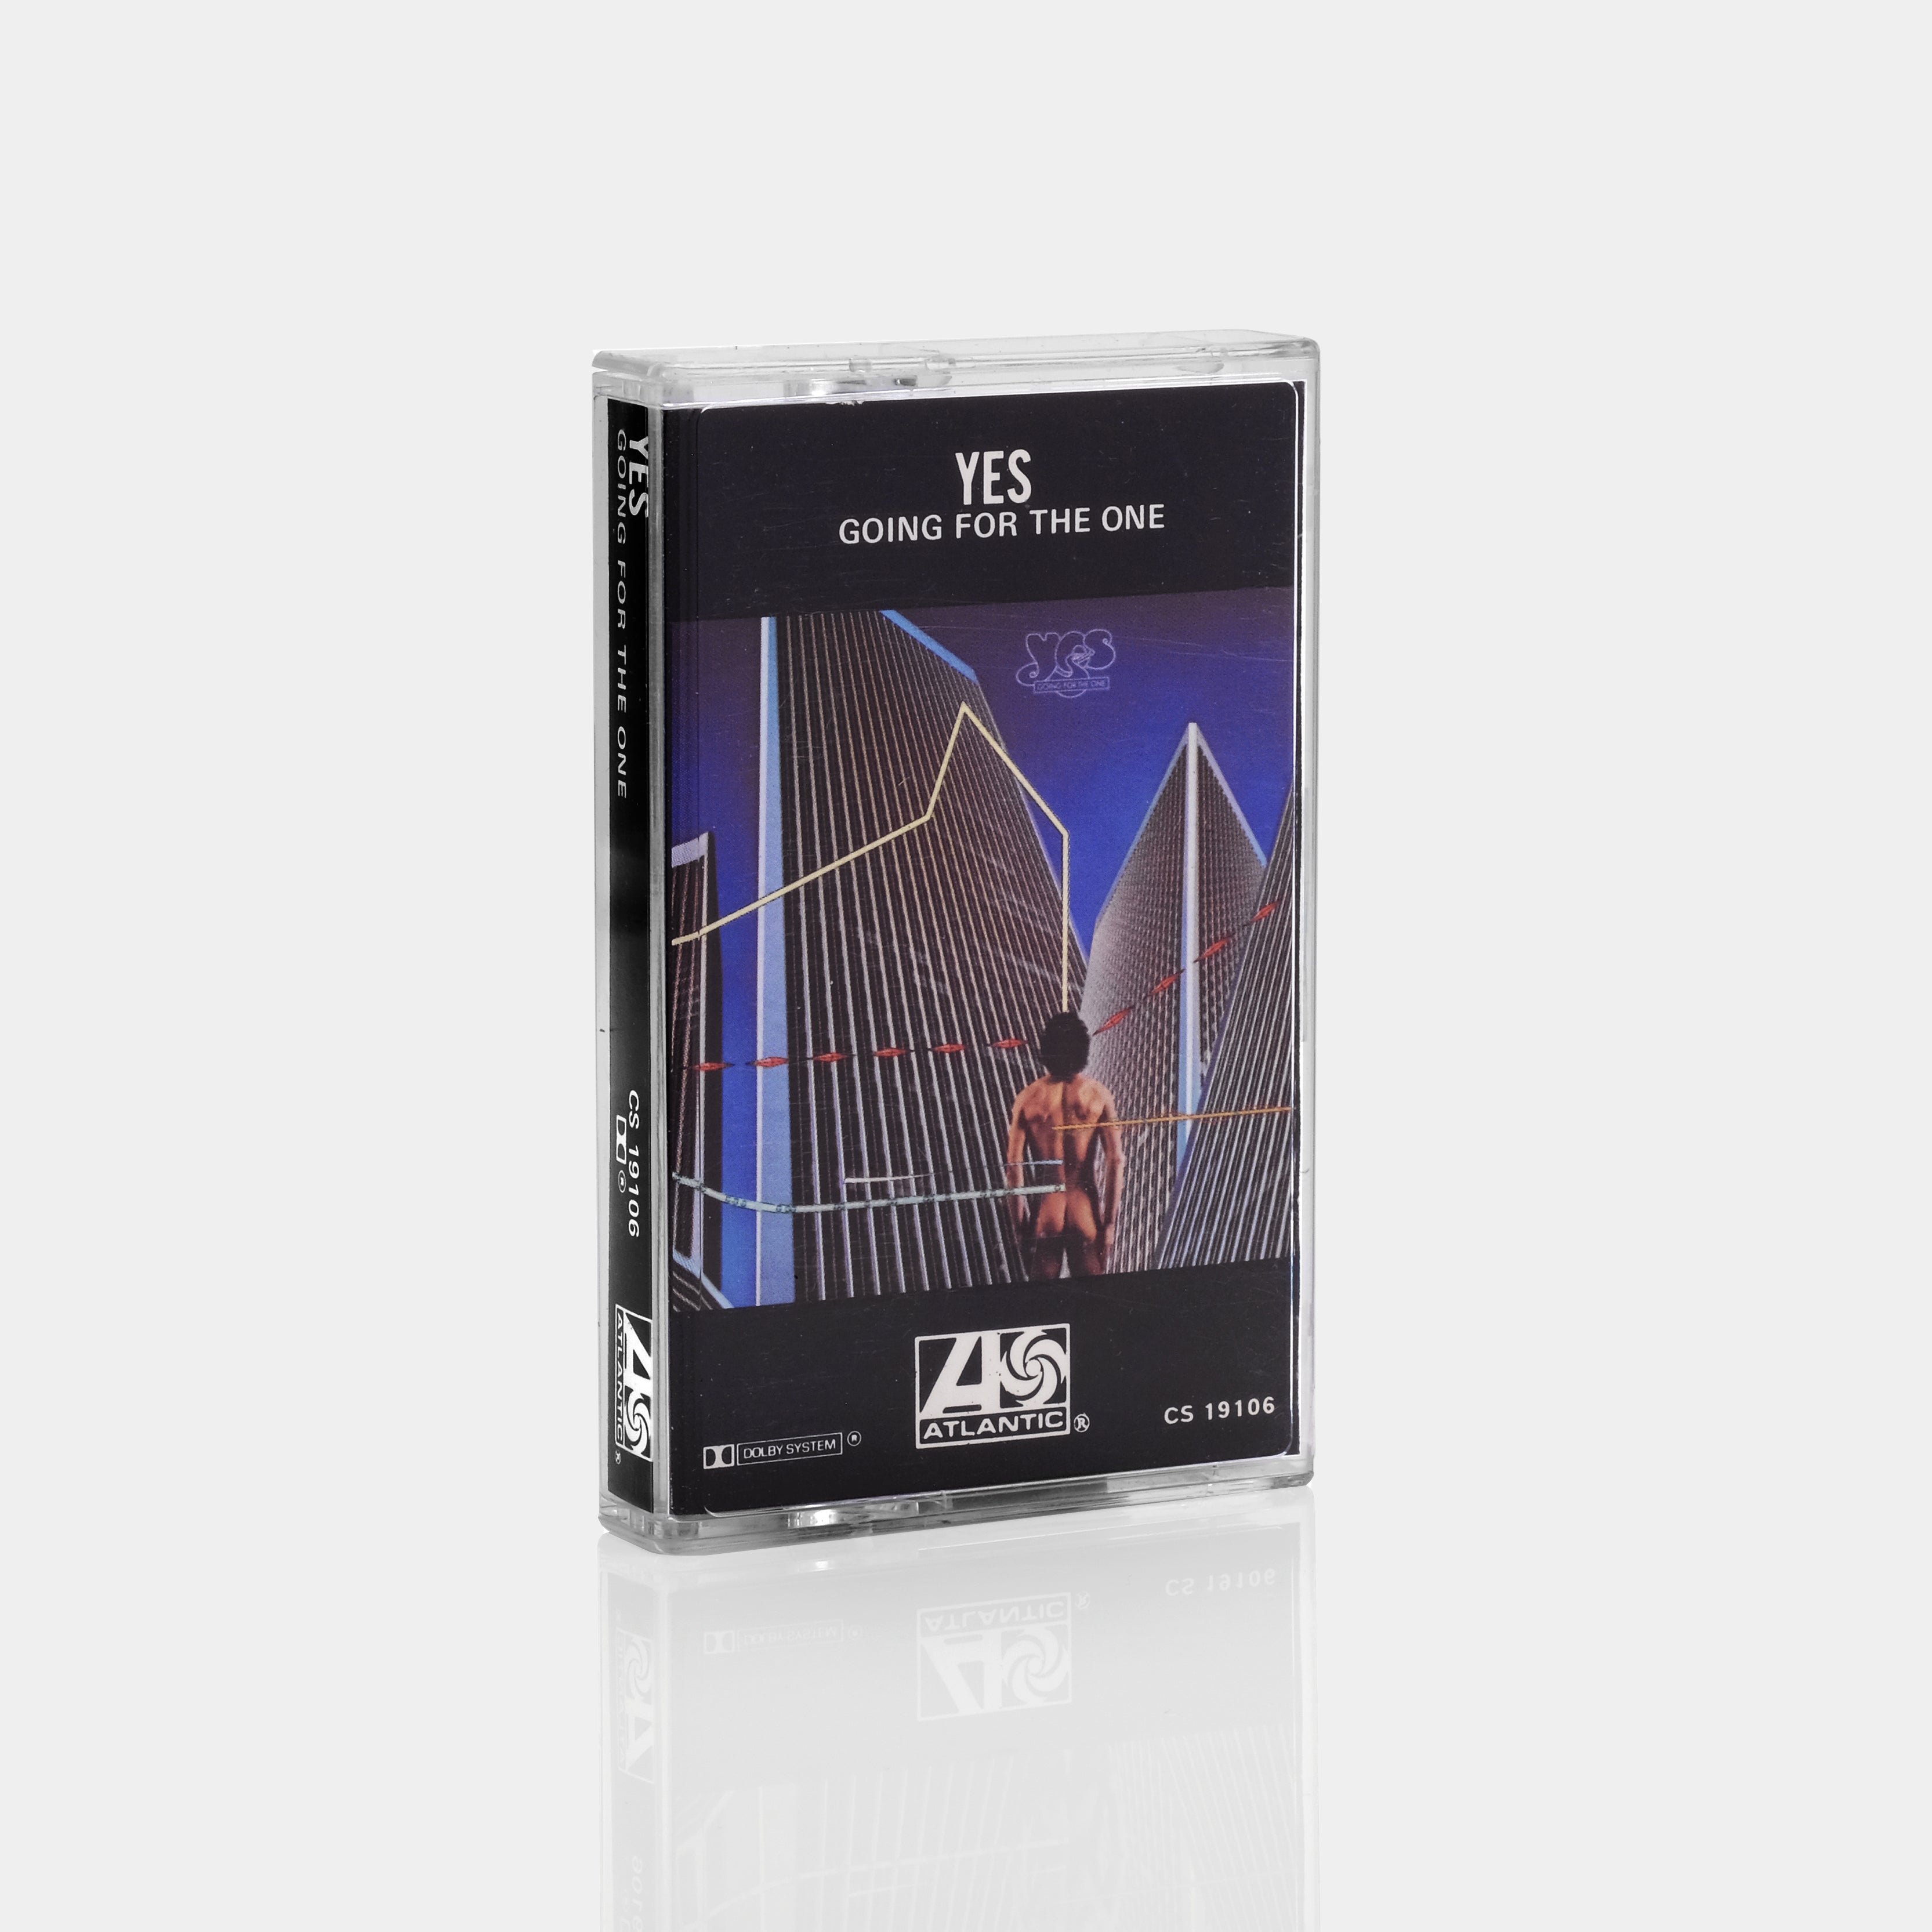 Yes - Going For The One Cassette Tape